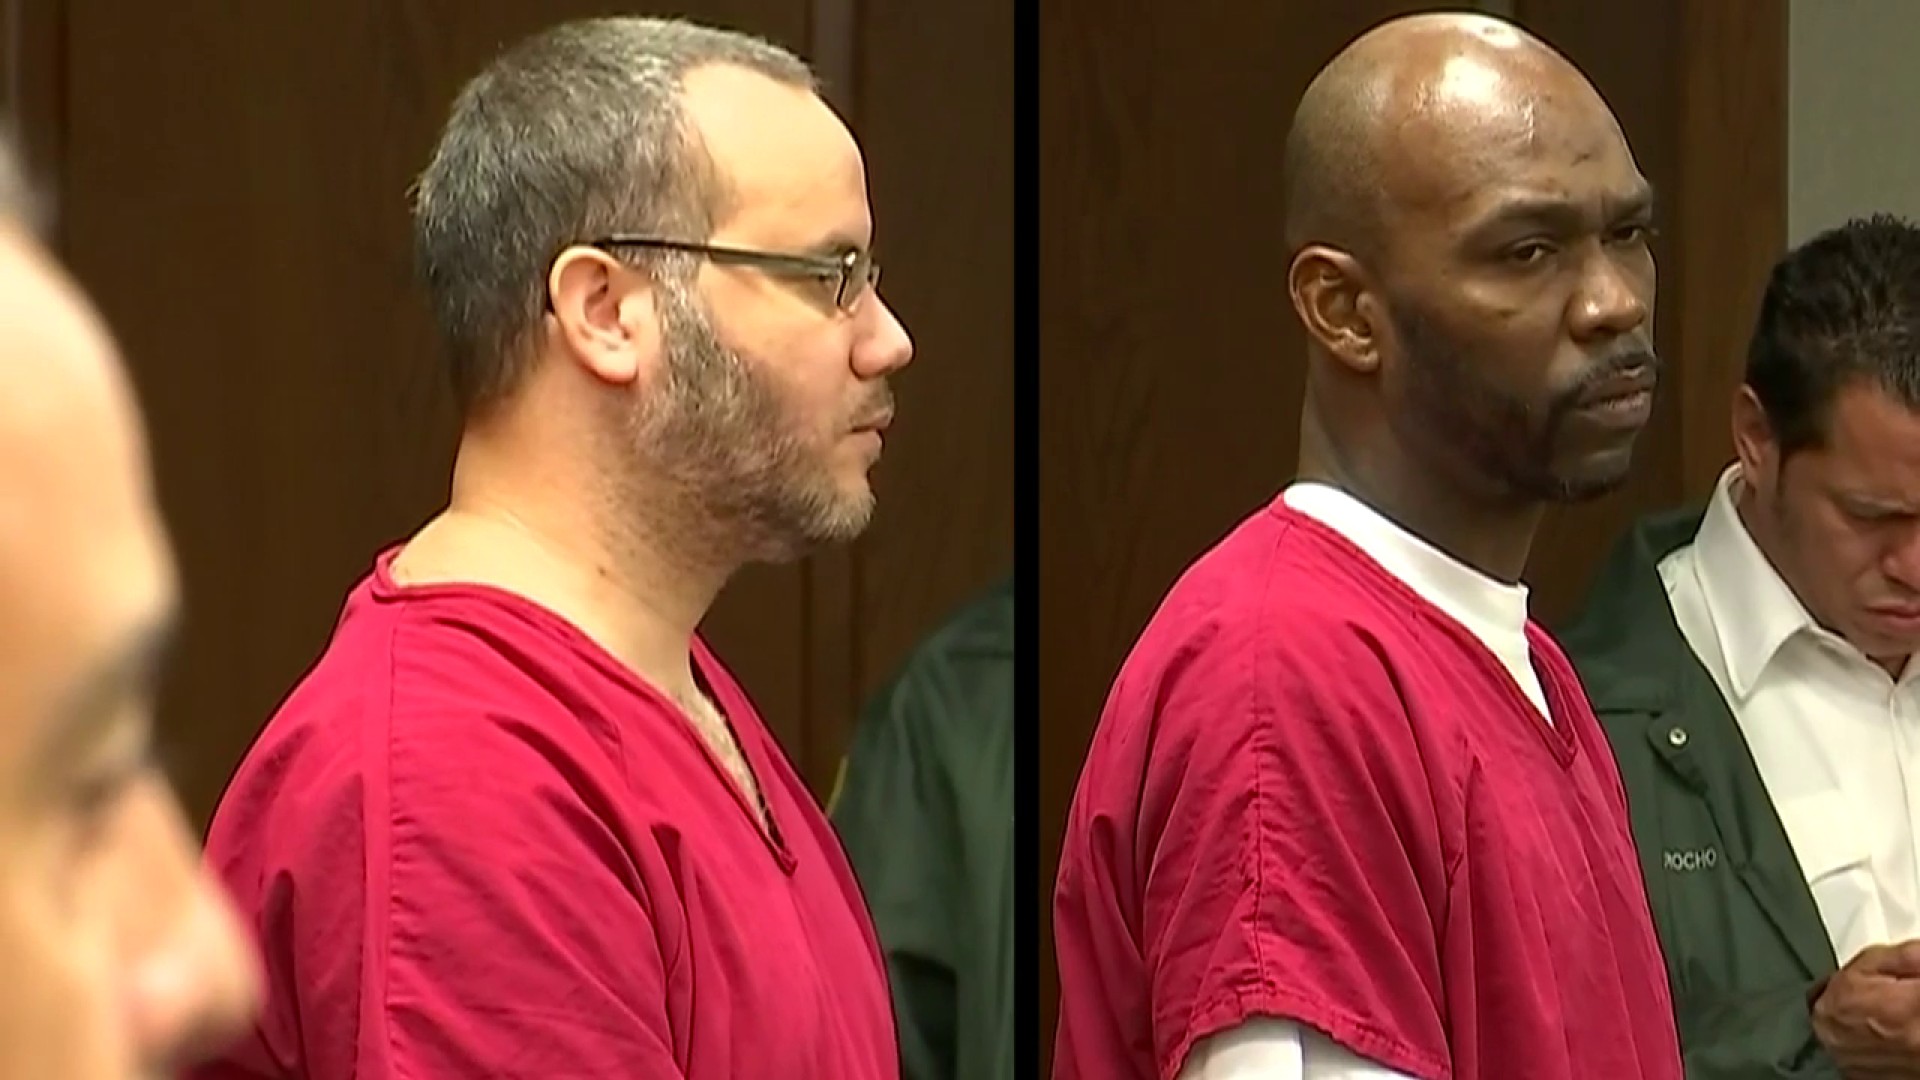 Florida Prosecutors Want Death Penalty For Two USVI Men Accused Of Murdering Dentist